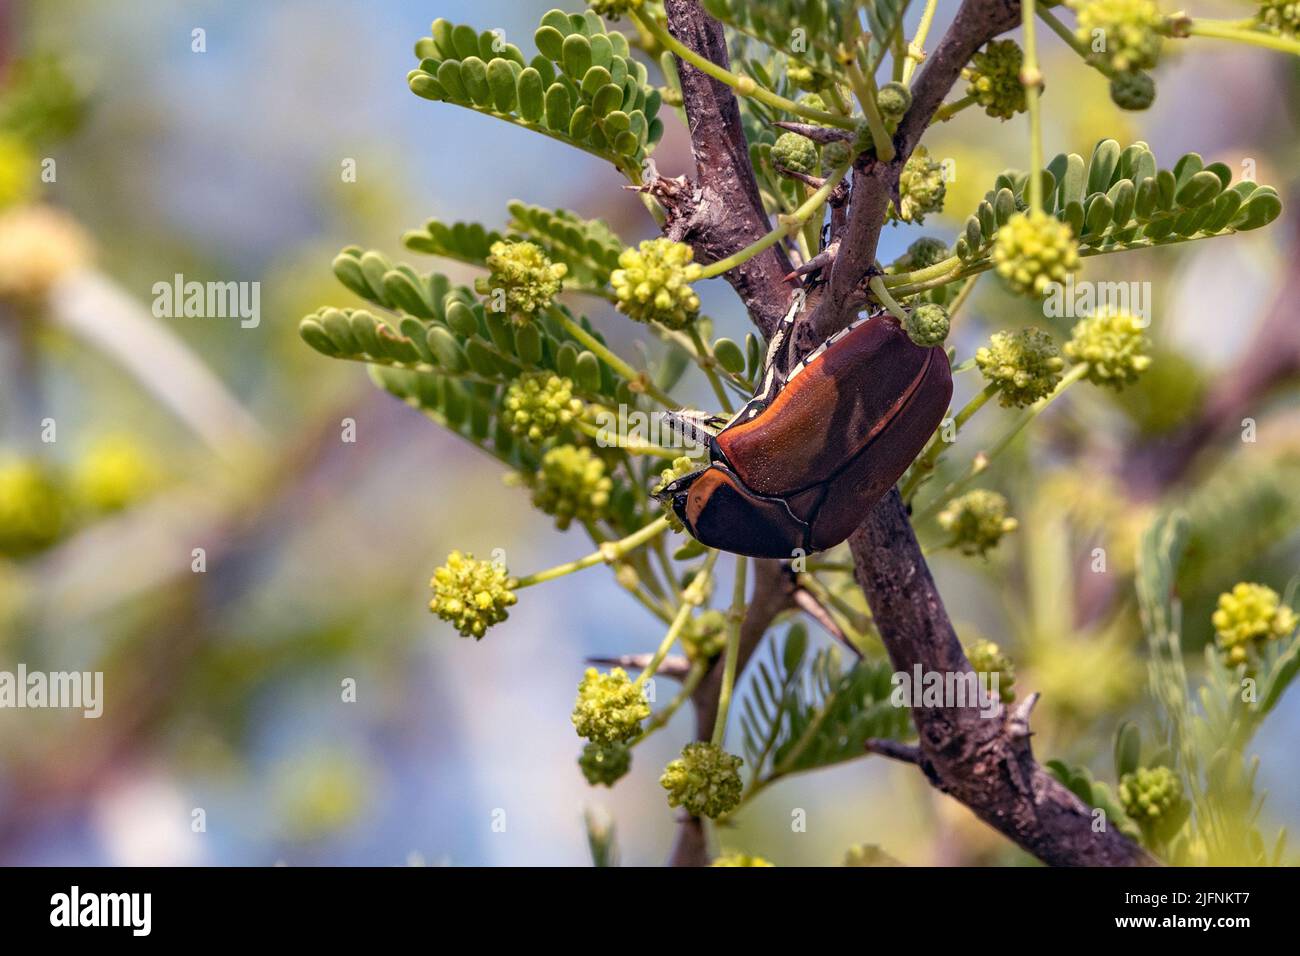 Fruit chafer (Dischista cincta) feeding in Acasia tree in Kruger NP, South Africa. Stock Photo